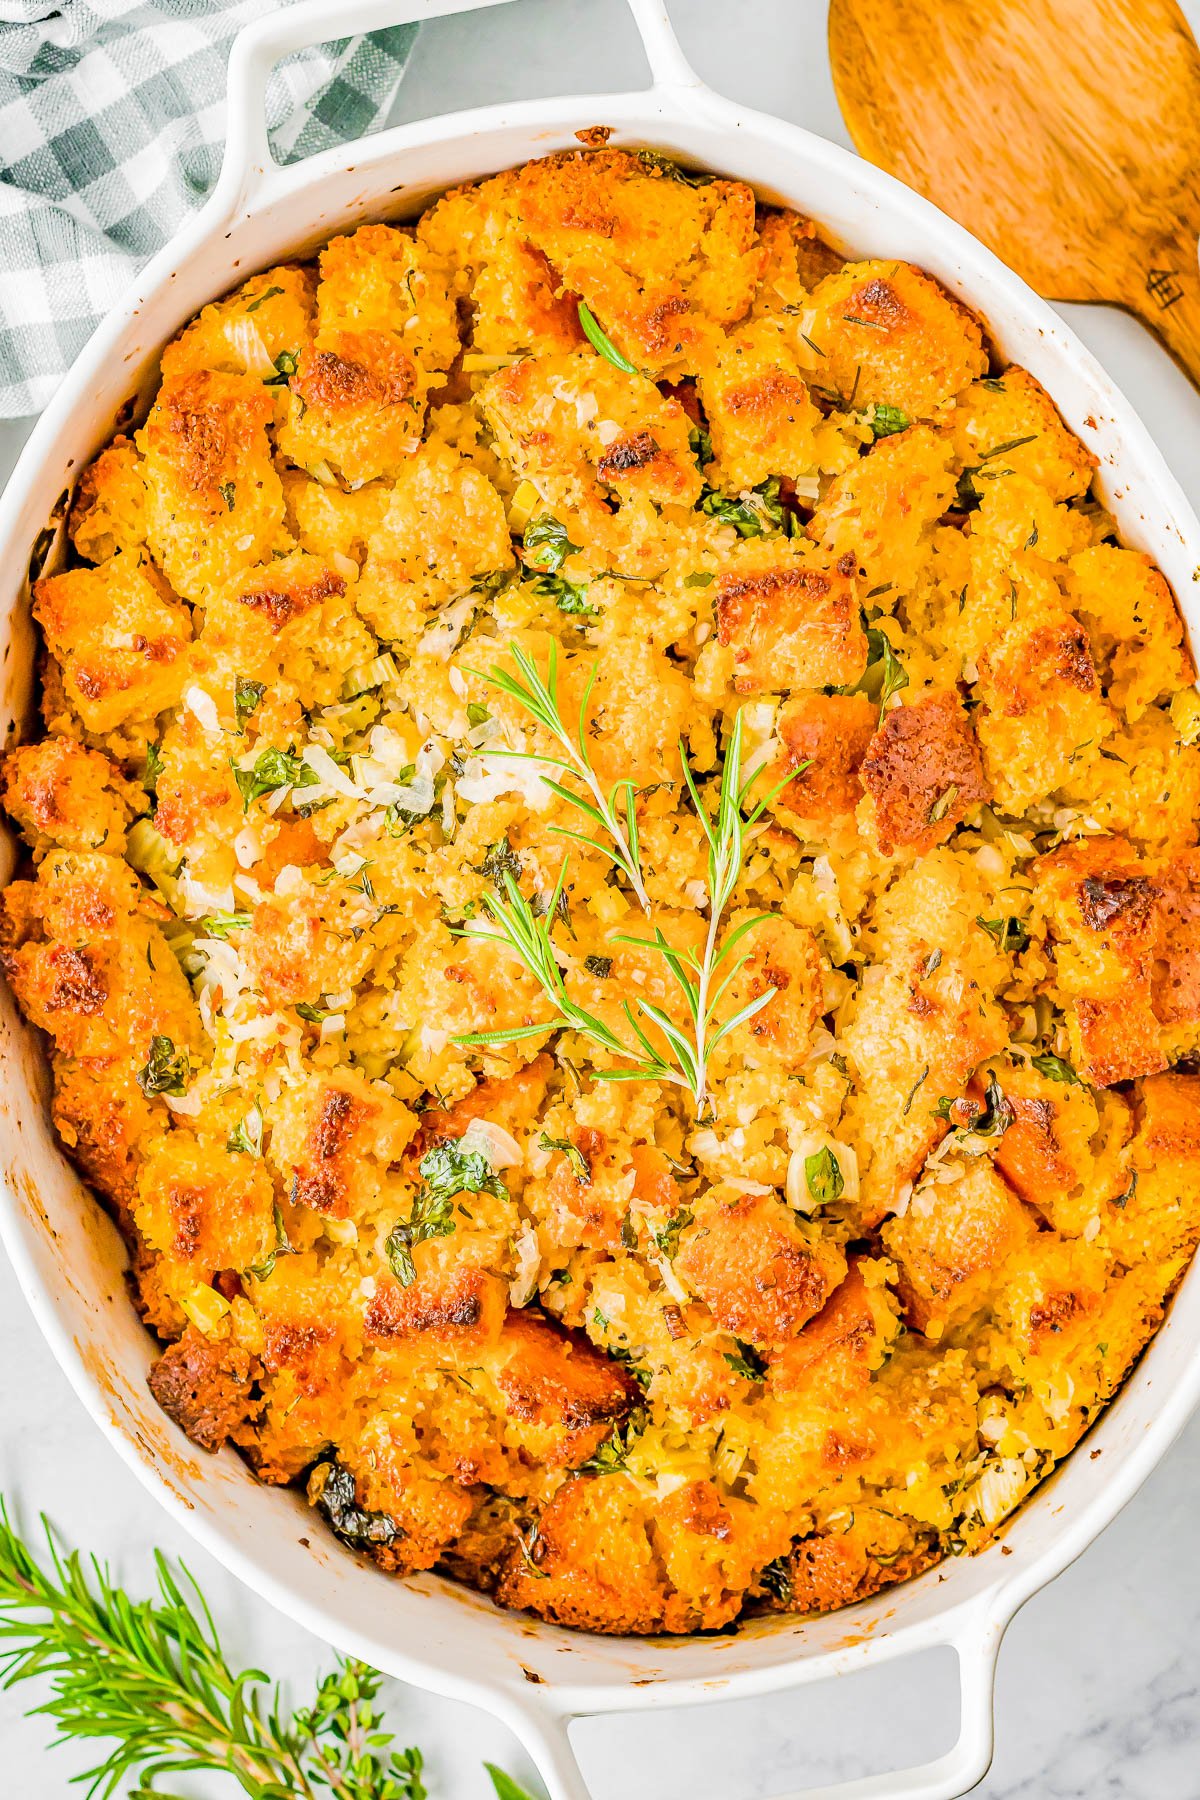 Cornbread Stuffing - Fast and easy homemade cornbread is transformed into a family favorite cornbread stuffing side dish with the addition of celery, onions, garlic, broth, and a bouquet of fresh herbs! Soft, tender, EASY, and sure to become a hit at your Thanksgiving and Christmas holiday celebrations! 